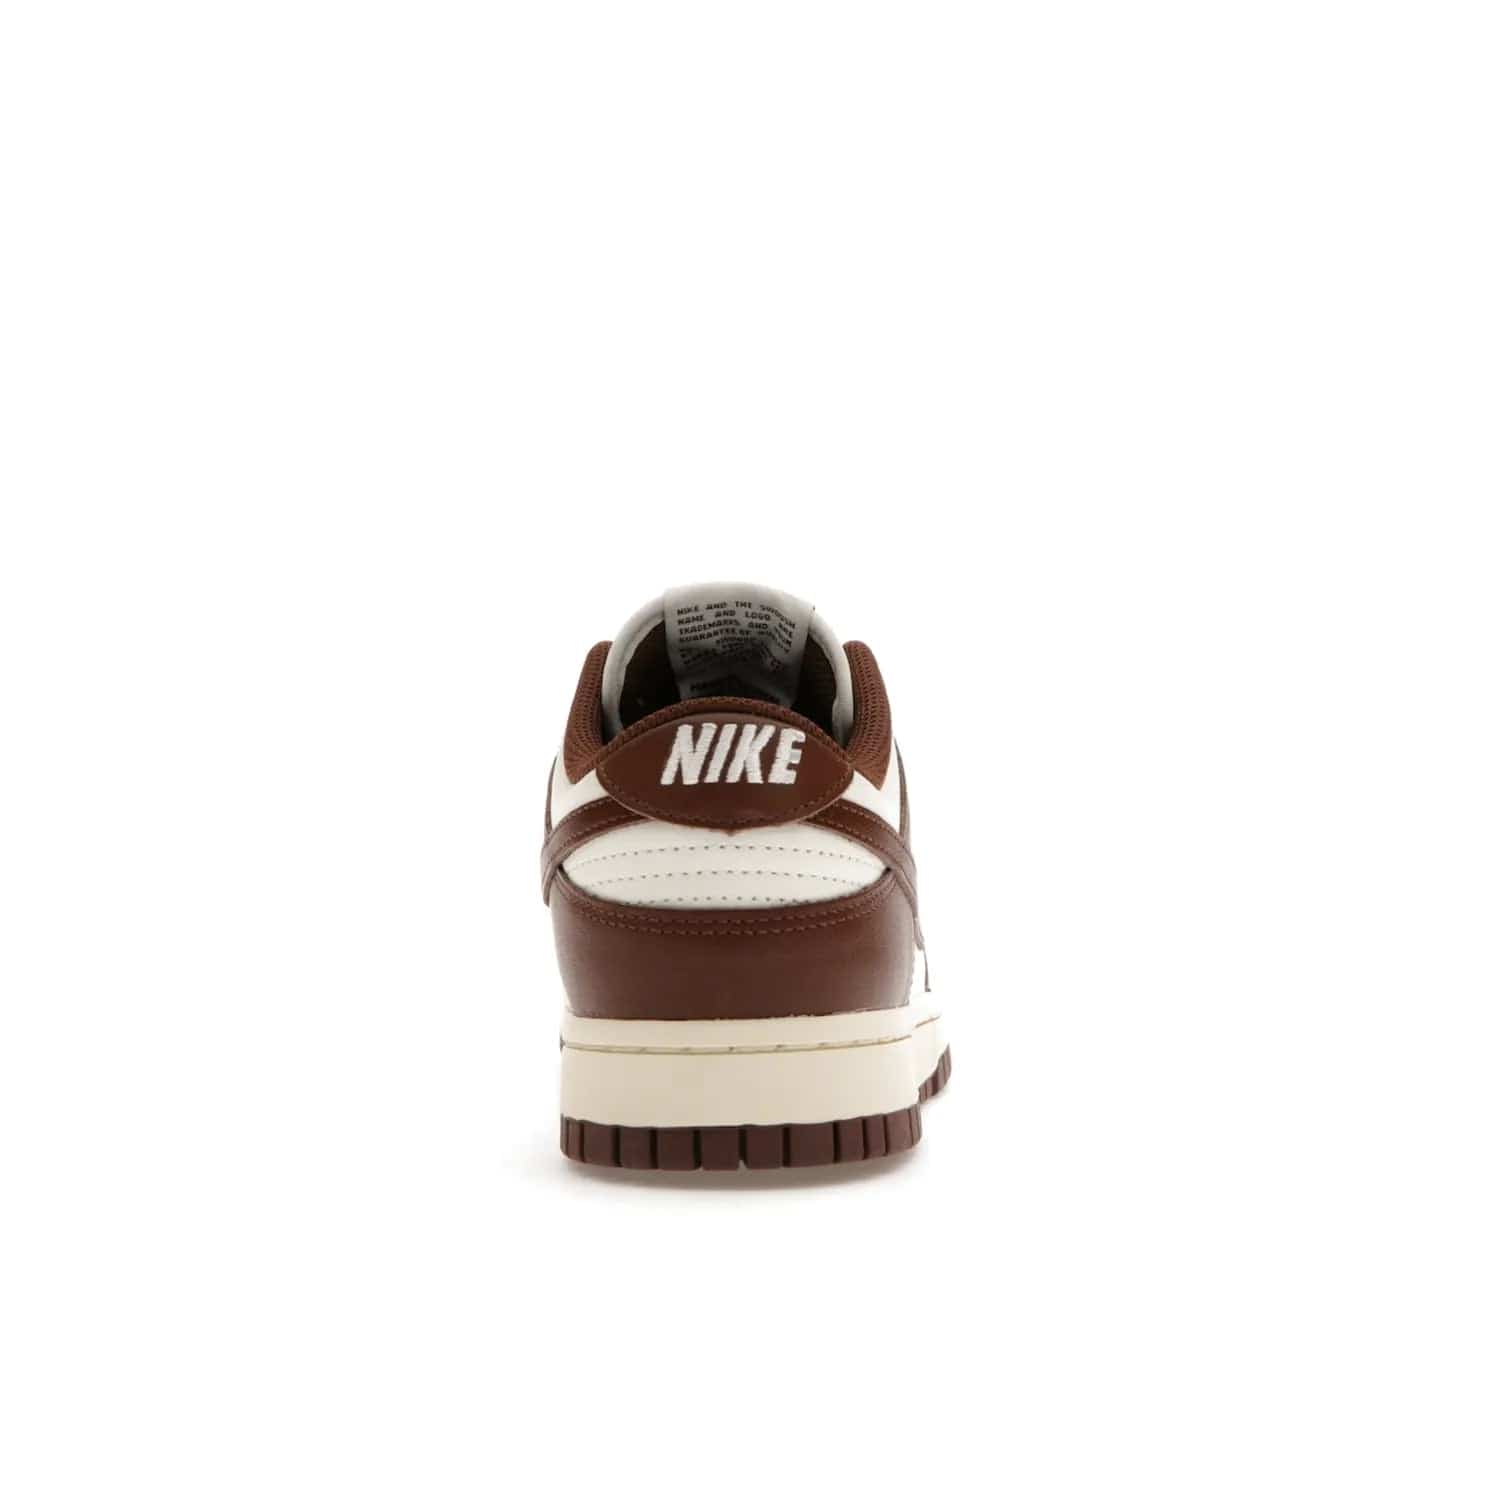 Nike Dunk Low Cacao Wow (Women's) - Image 28 - Only at www.BallersClubKickz.com - Revised
Get the Nike Dunk Low Cacao Wow and make a statement! Plush leather and a cool Cacao Wow finish bring together a unique mix of comfort and fashion that will turn heads. Boosted with a Coconut Milk hue. Shop today.